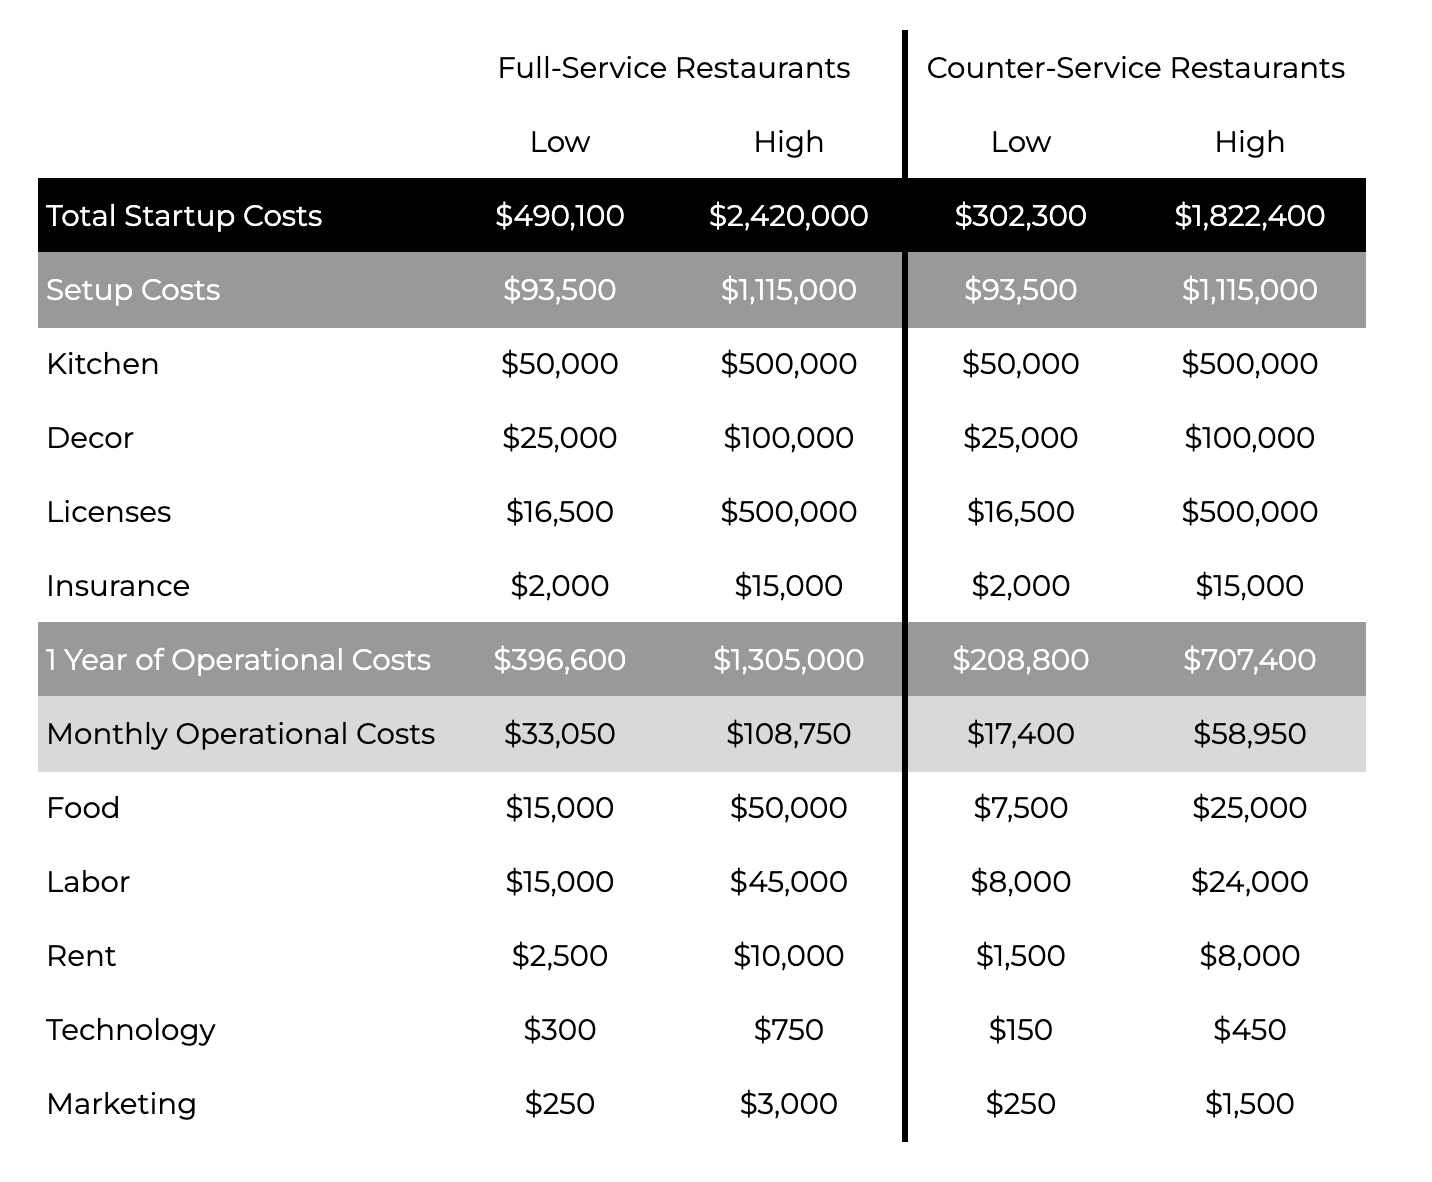 A chart with the ranges of costs for full-service and counter-service restaurants.